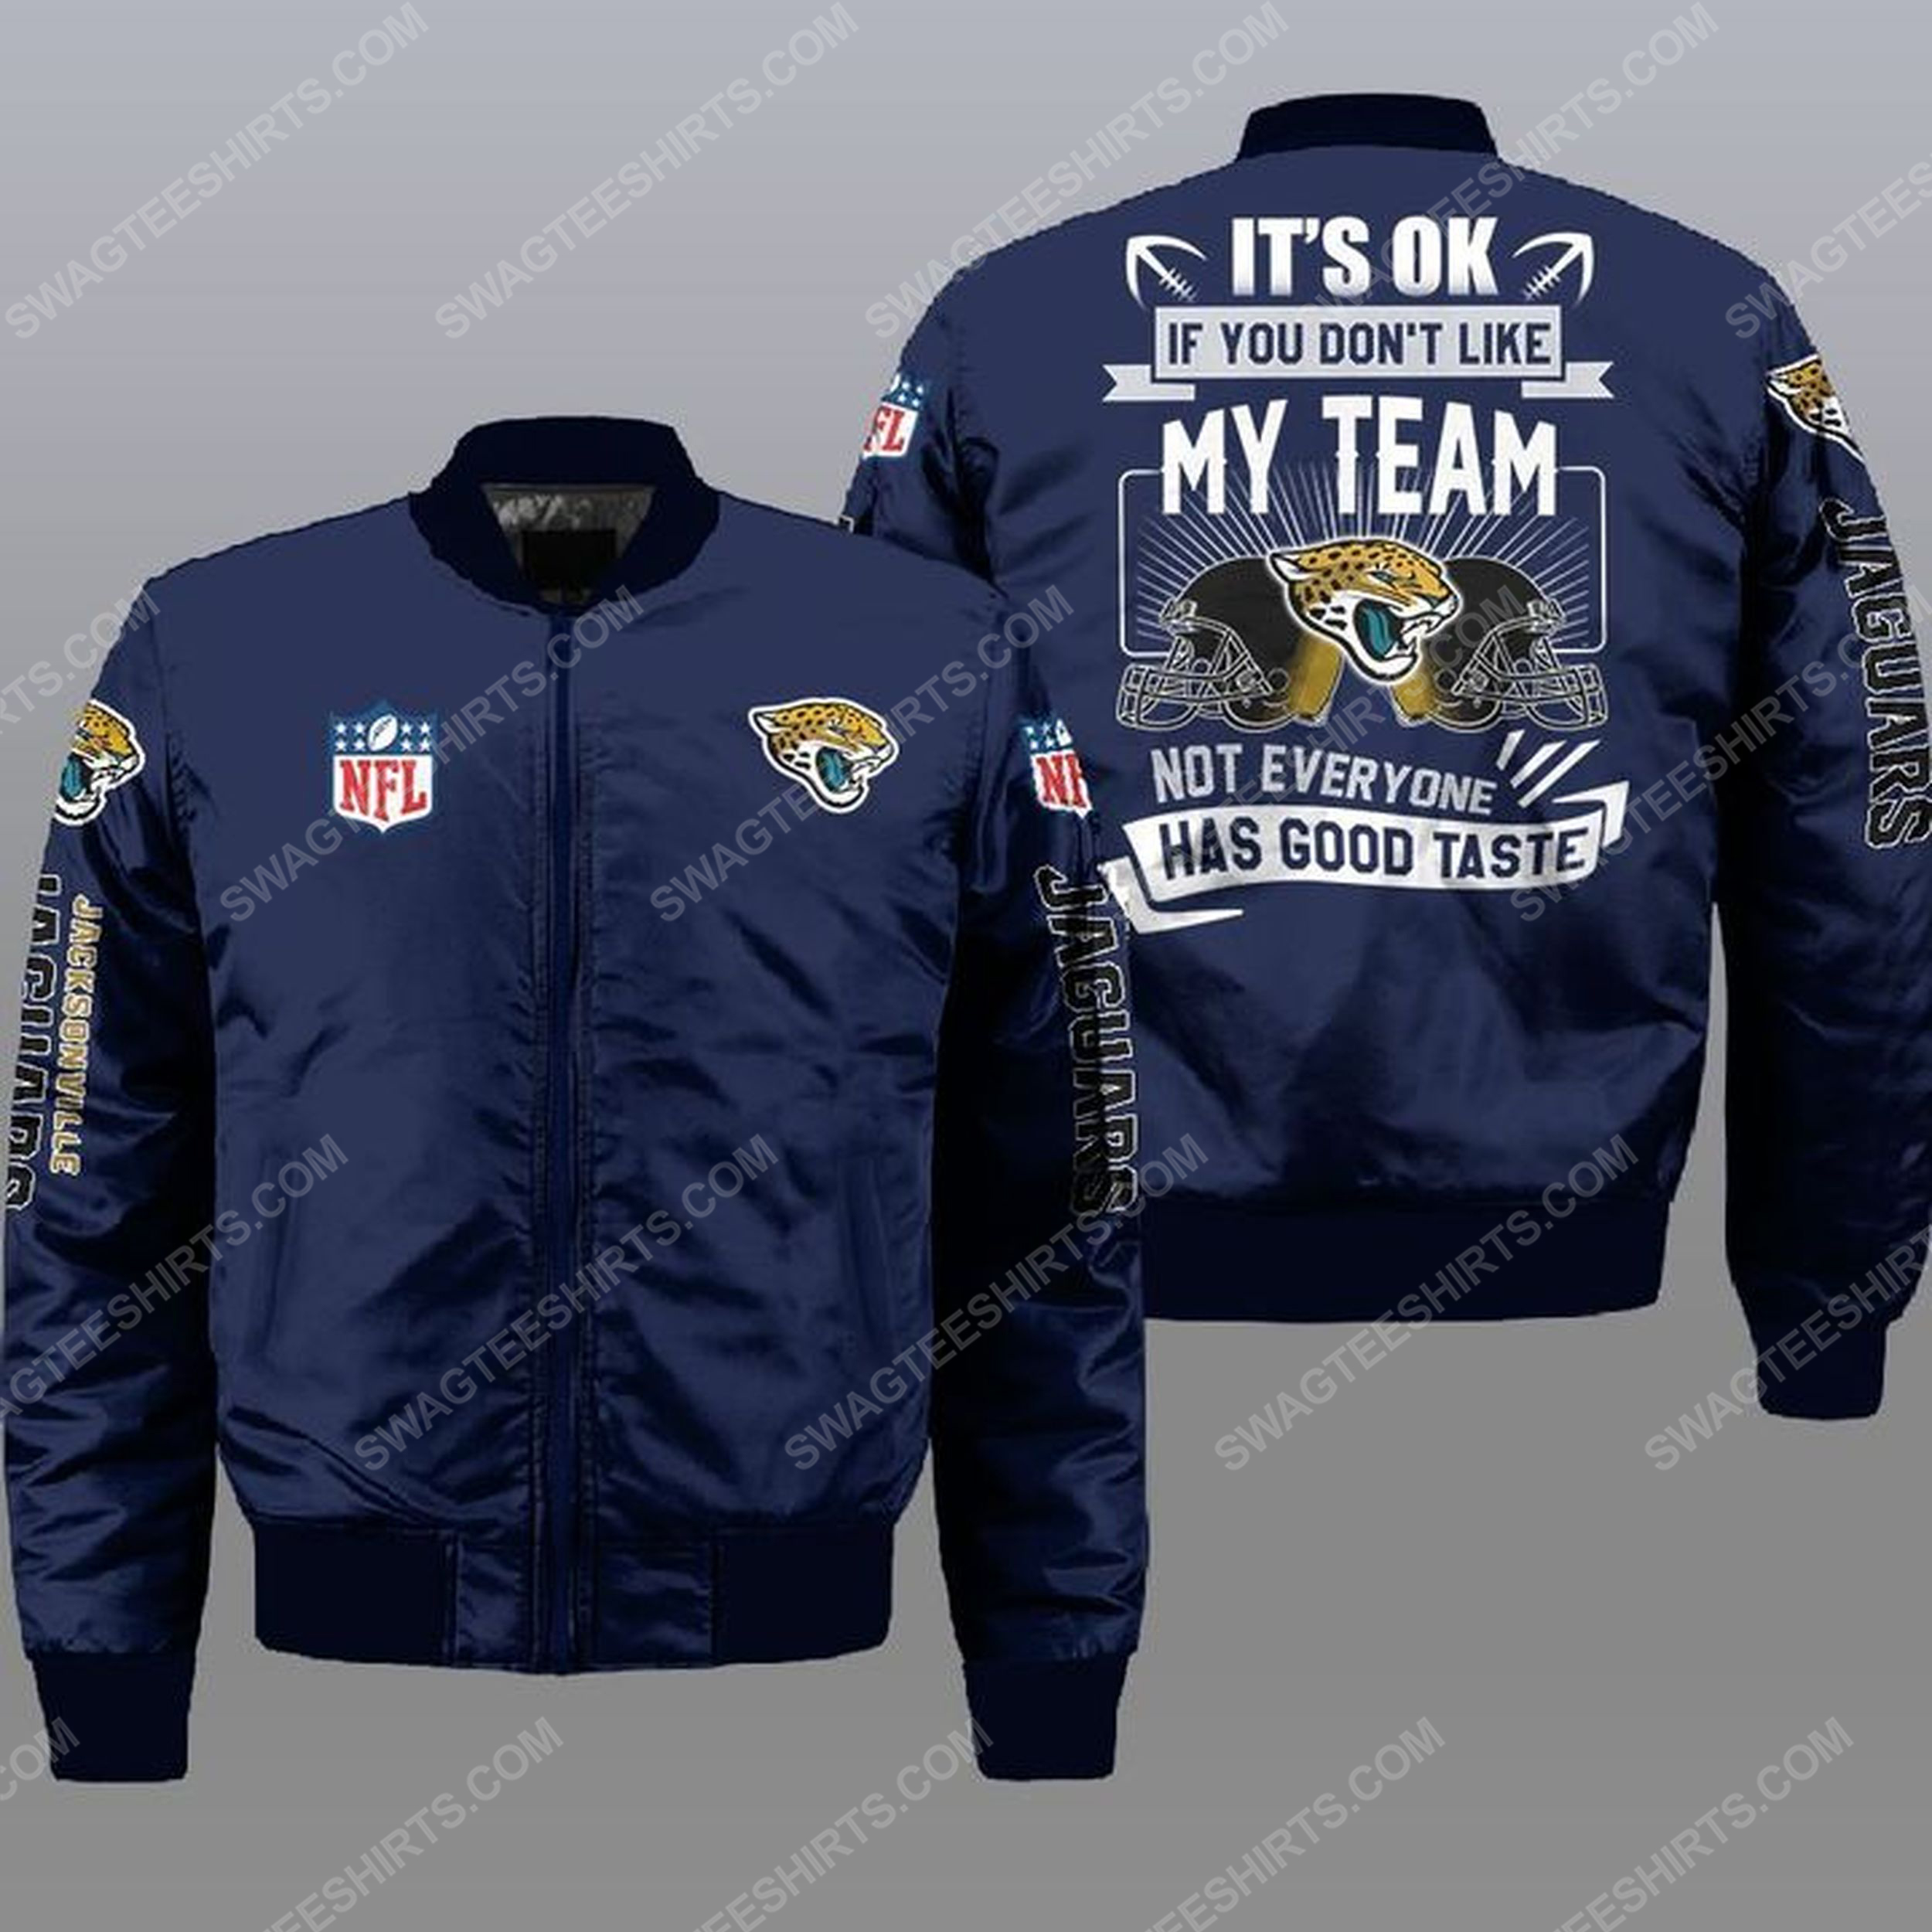 It's ok if you don't like my team jacksonville jaguars all over print bomber jacket -navy 1